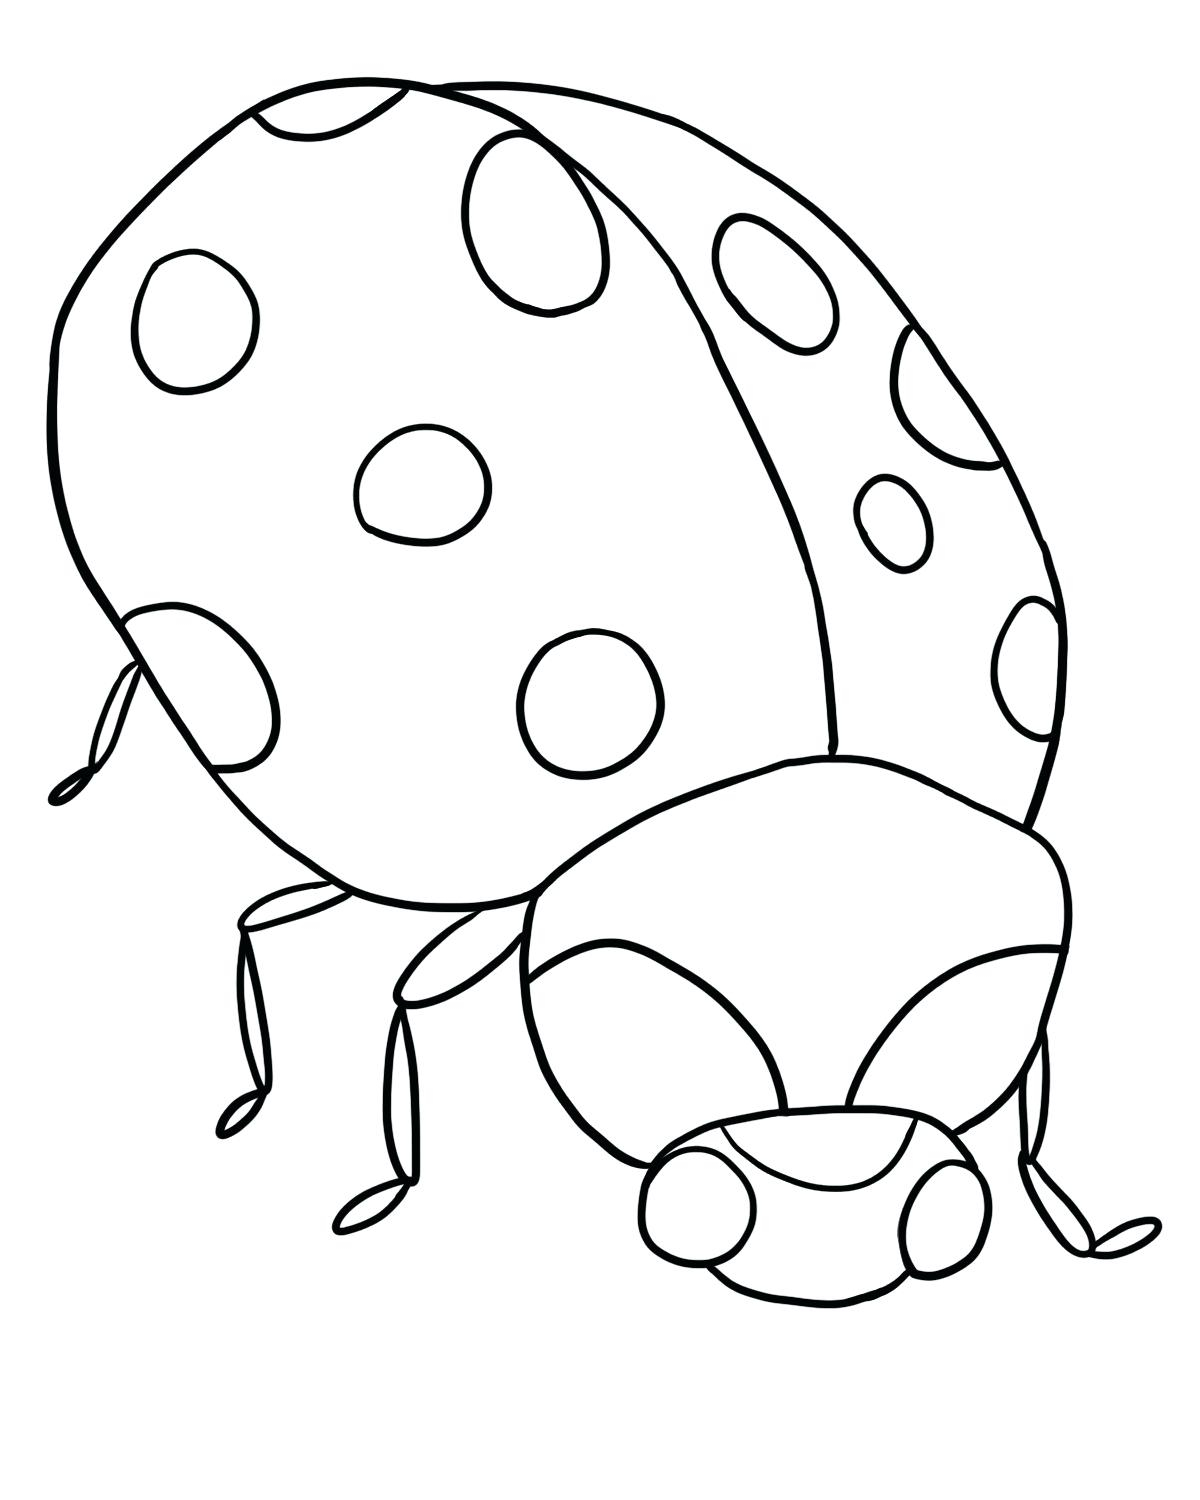 Bug Coloring Pages For Kids Bug Coloring Pictures Safewaysheetco